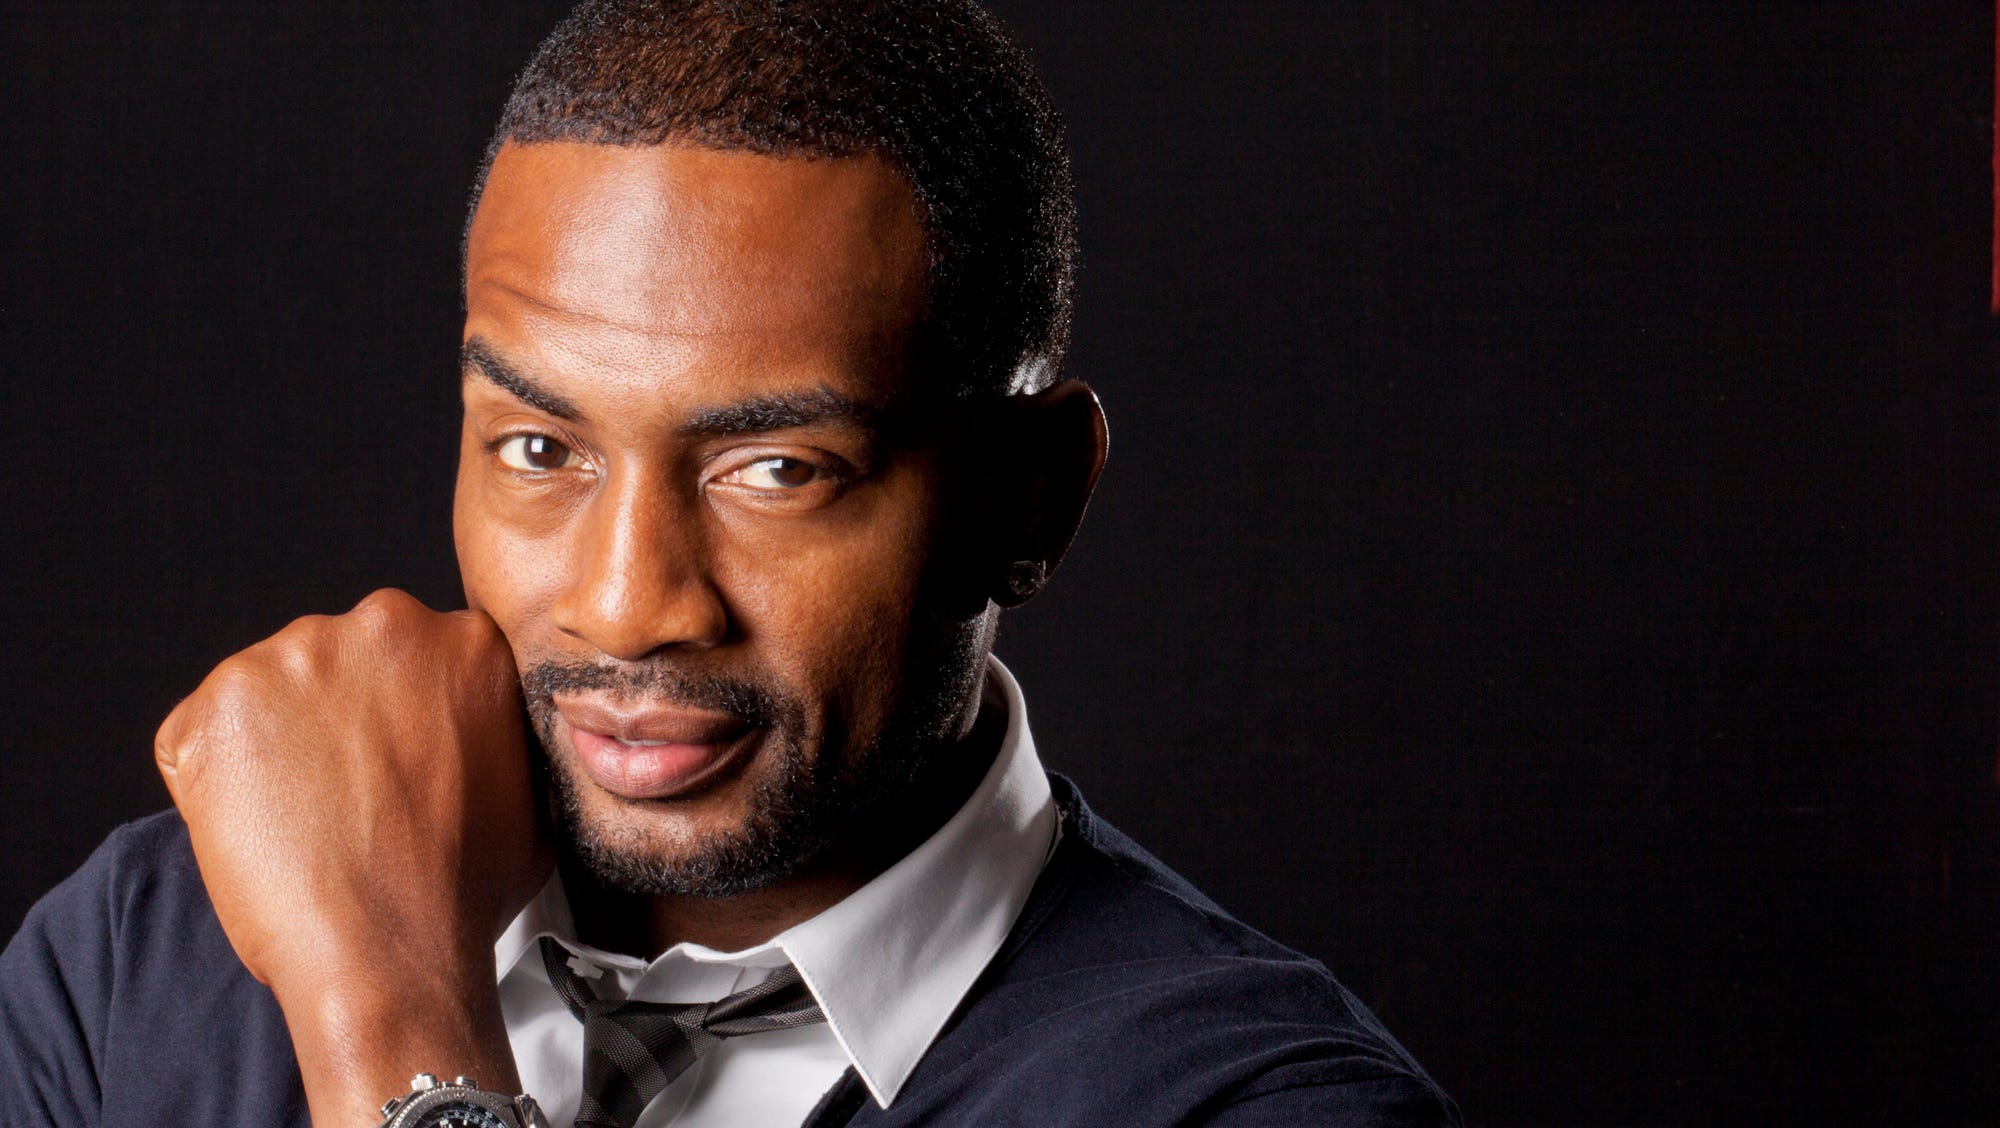 Bill Bellamy Wife Kristen Bellamy Have been Married for over 20 Years!